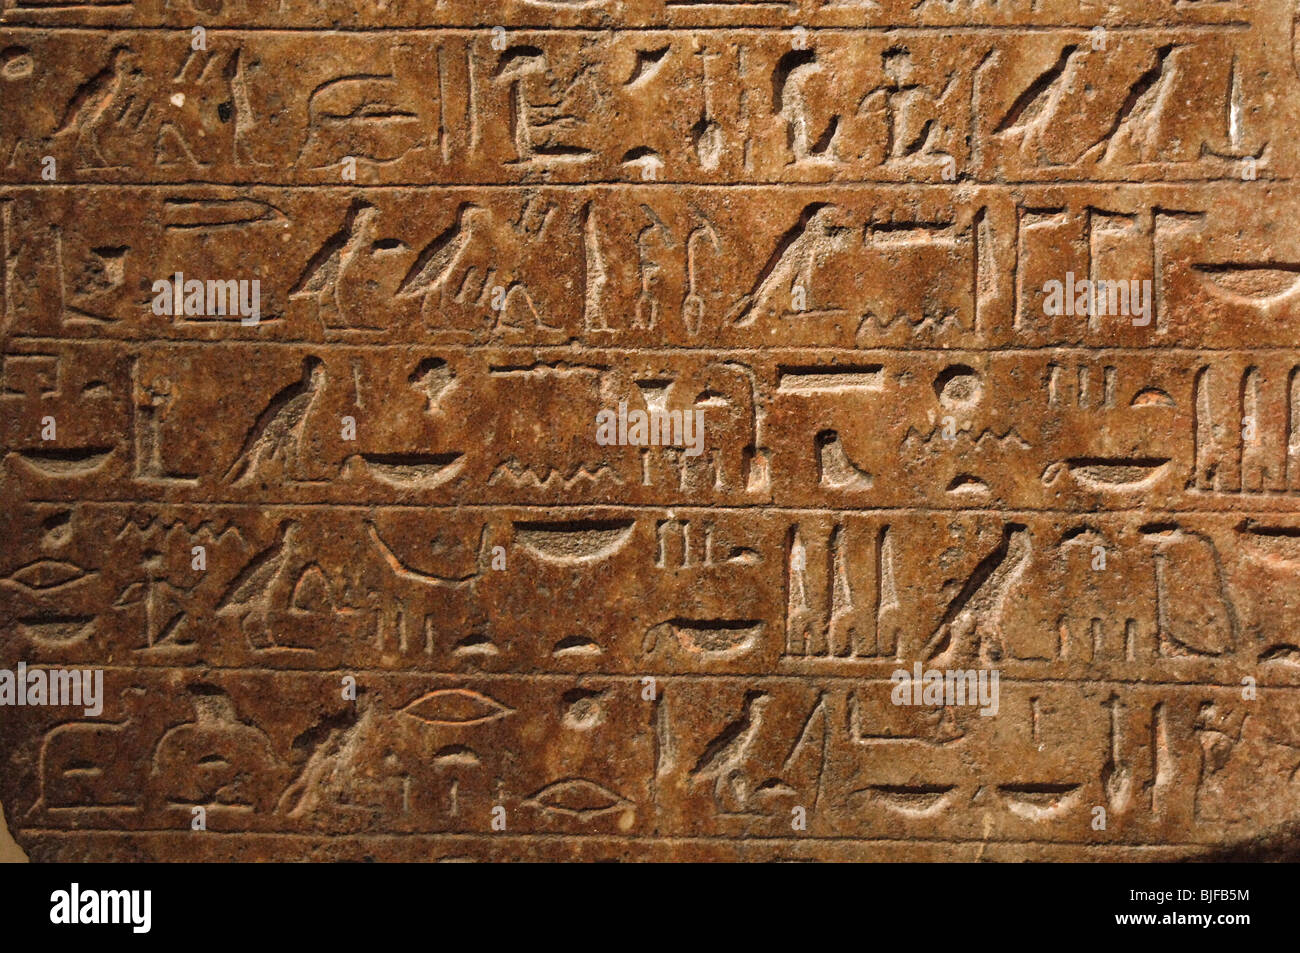 Egyptian Art. New Empire. Dynasty XVIII. Stele with a hymn to Amun. Detail of hieroglyphic writing. Budapest. Hungary. Stock Photo